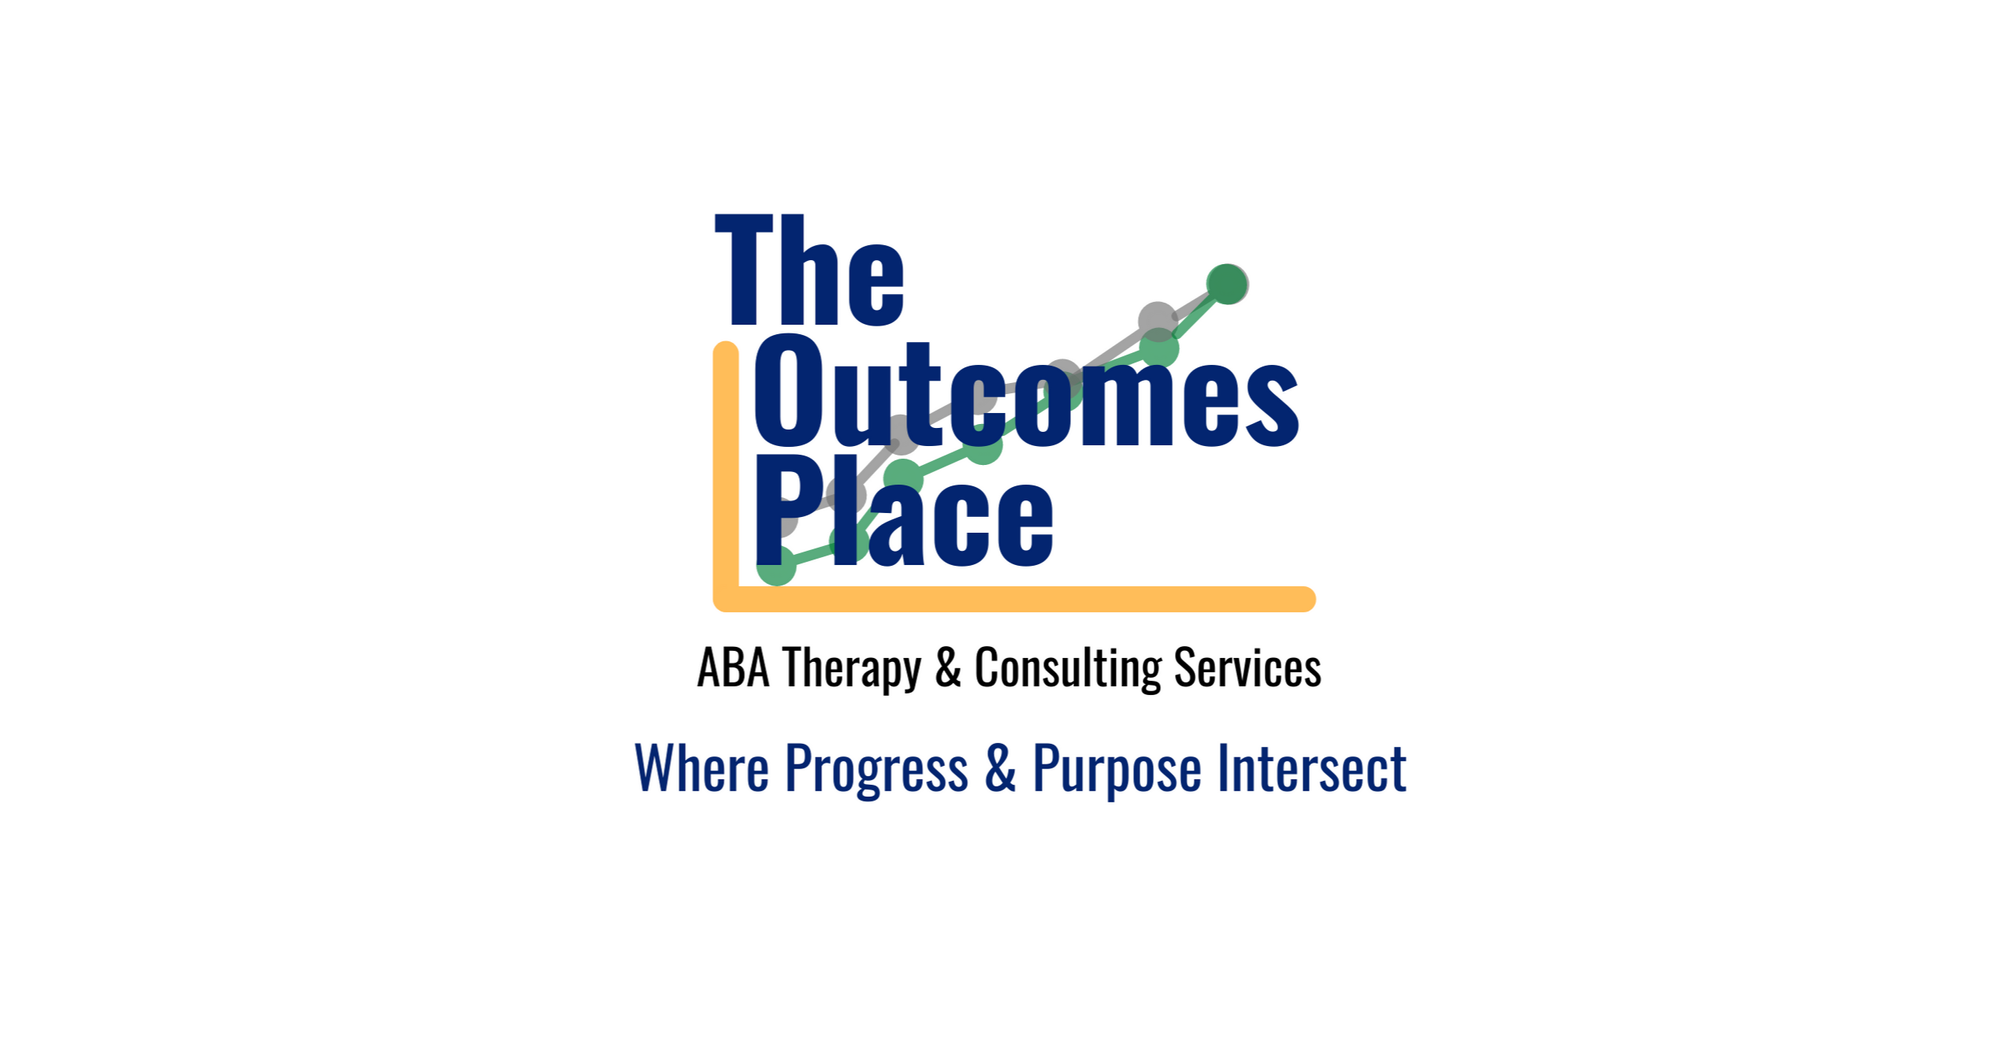 ABA Therapy & Consulting Services - The Outcomes Place